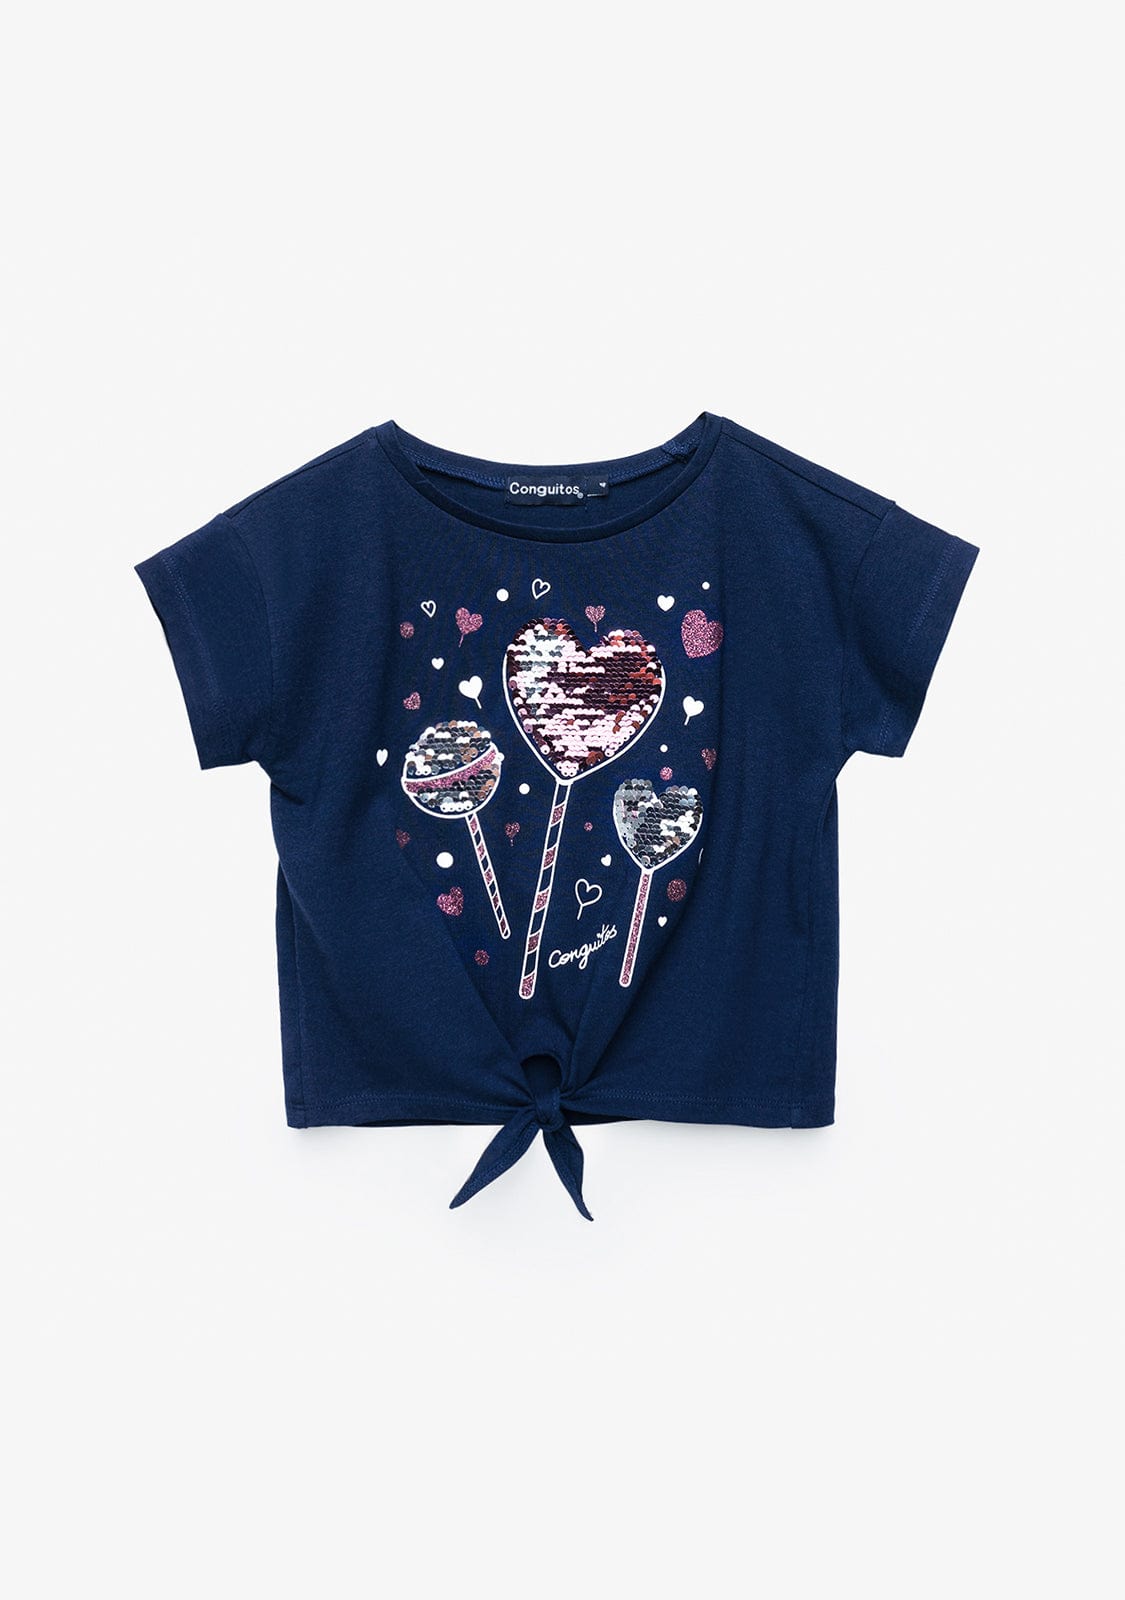 CONGUITOS TEXTIL Clothing Girl's Navy Knotted T-Shirt